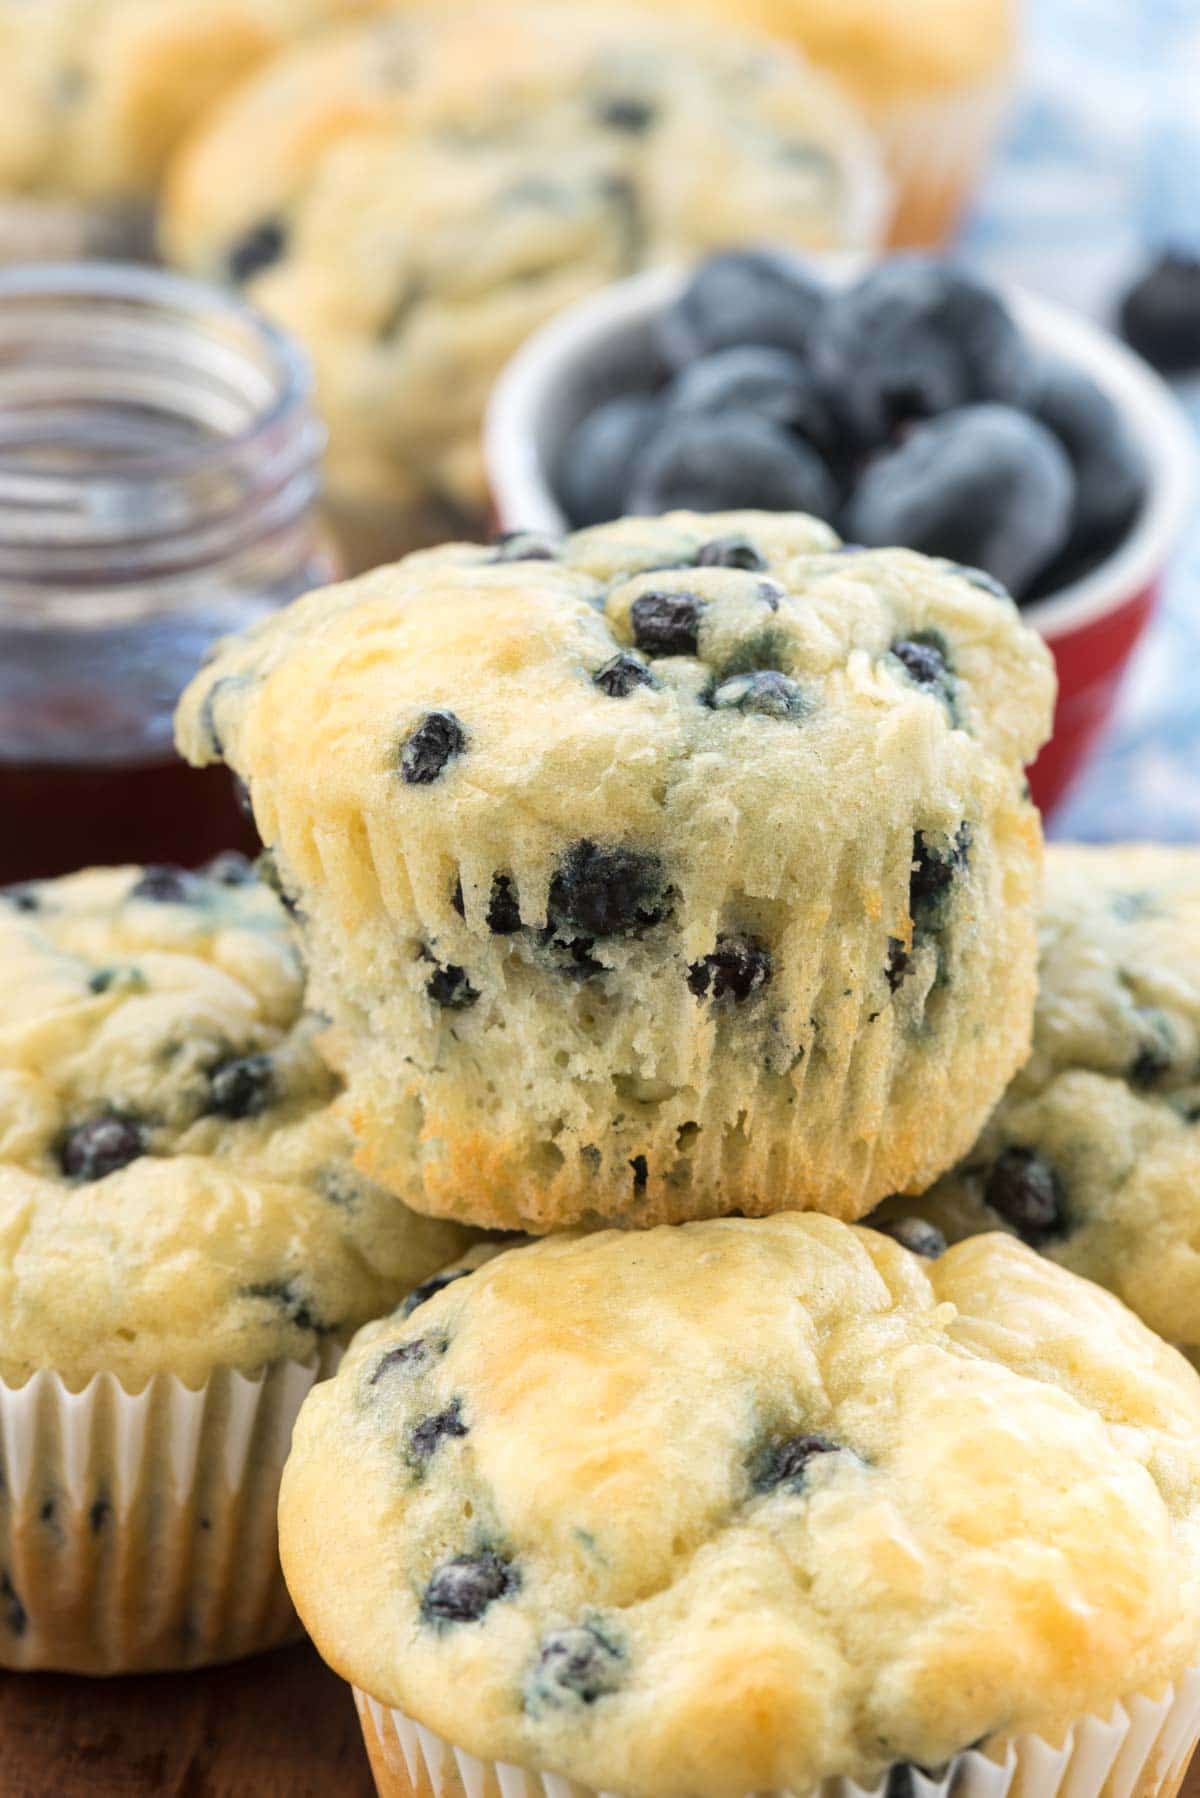 Blueberry Pancake Muffins - these easy muffins are made with pancake batter. They're great for on the go or with syrup for an easy make-ahead breakfast!